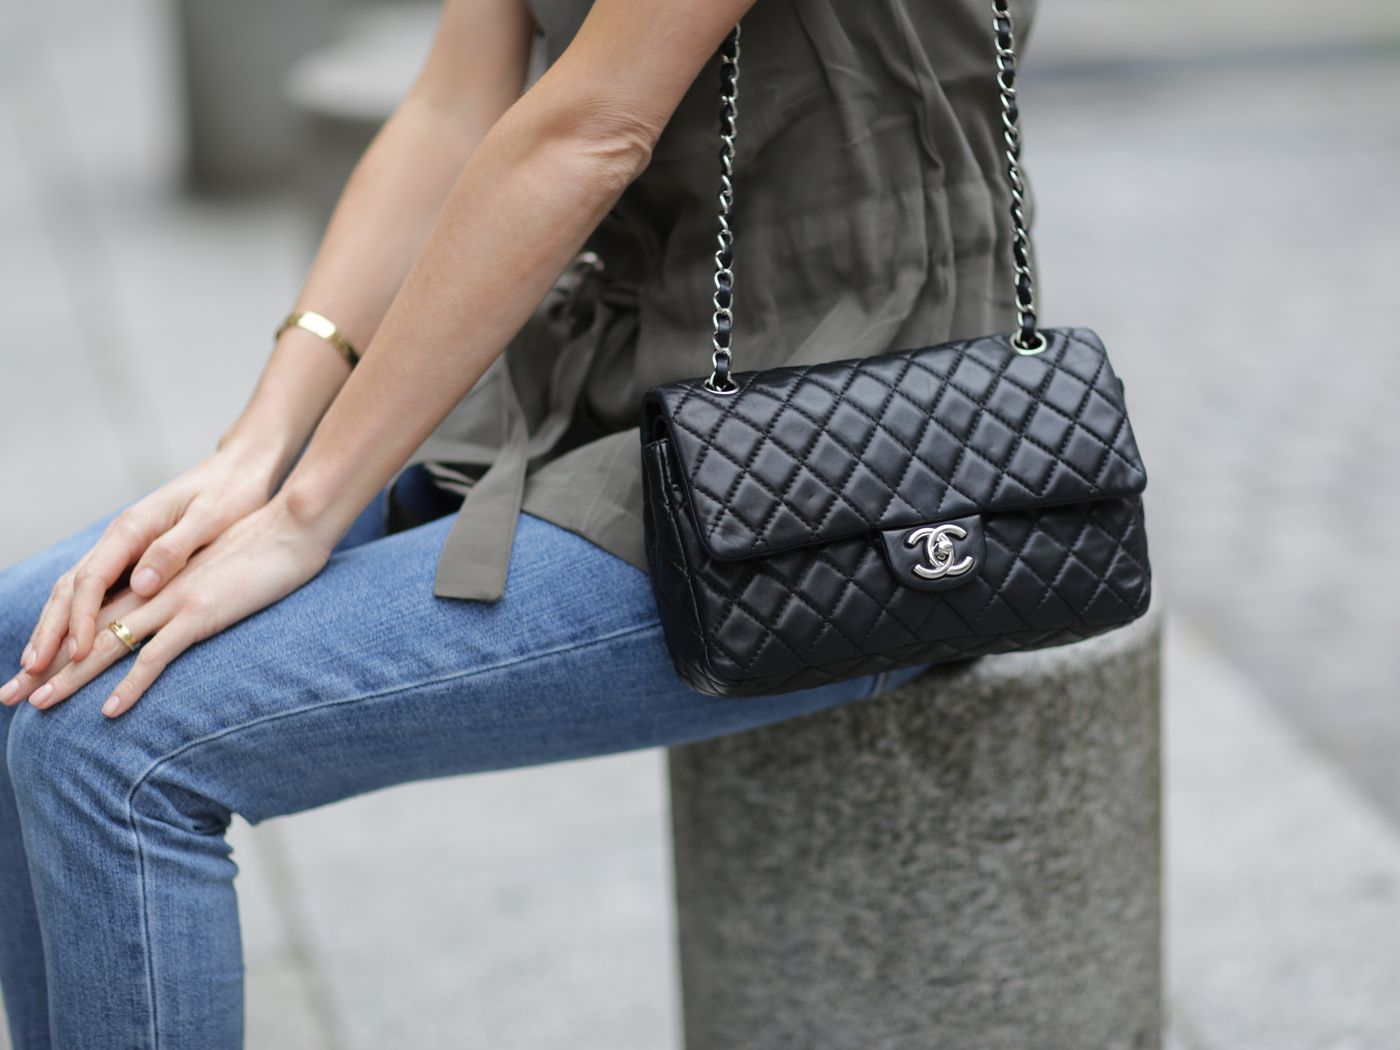 CHANEL FLAP BAG WITH TOP HANDLE